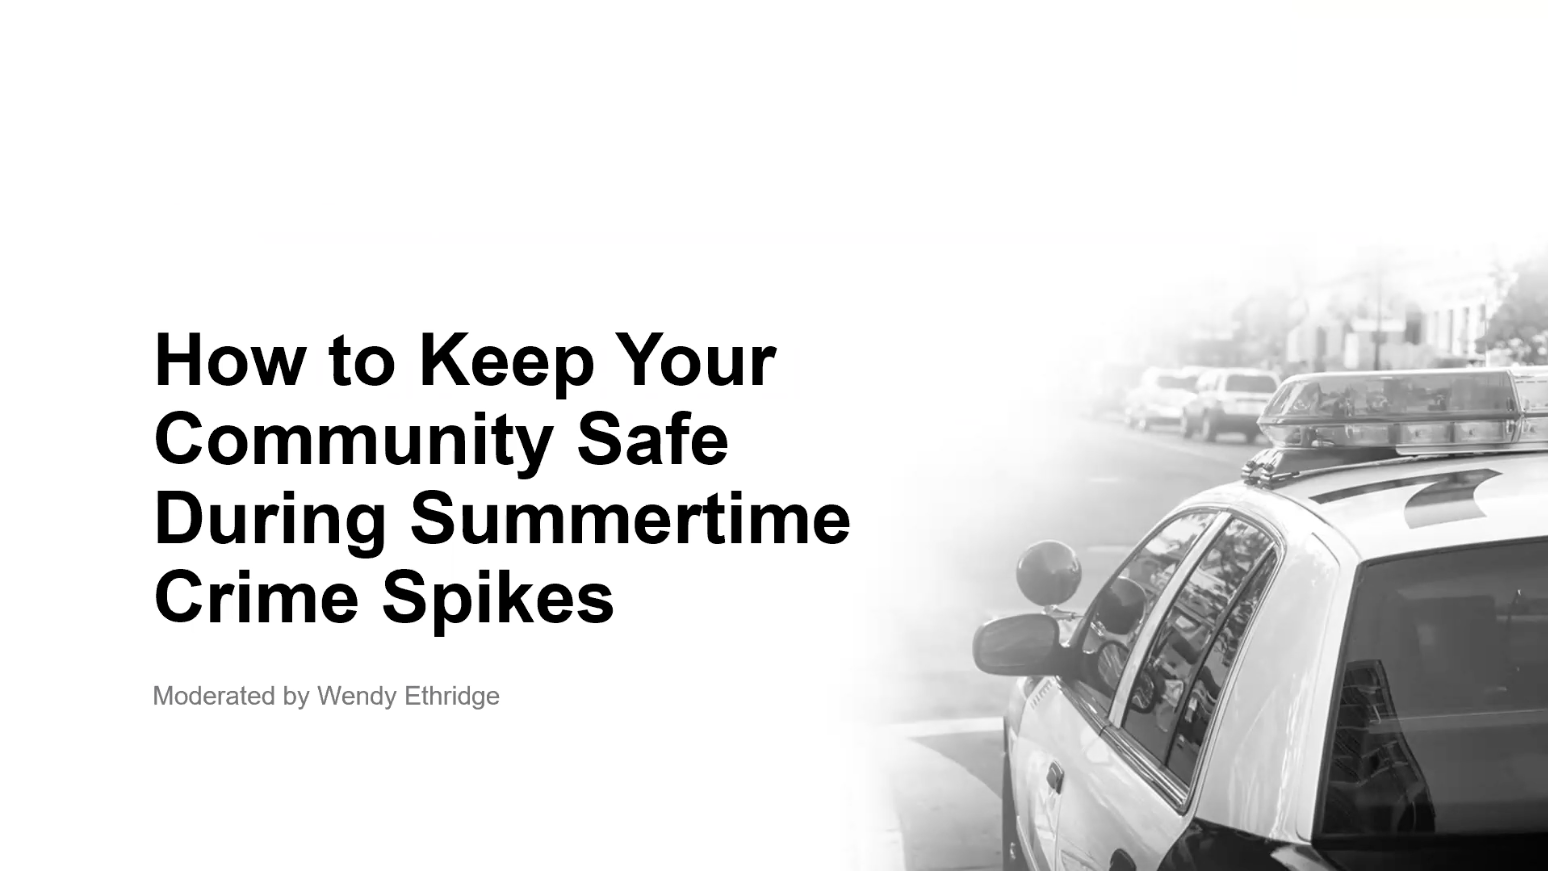 032823-Connect-Webinar-How-to-Keep-Your-Community-Safe-During-Summertime-Crime-Spikes